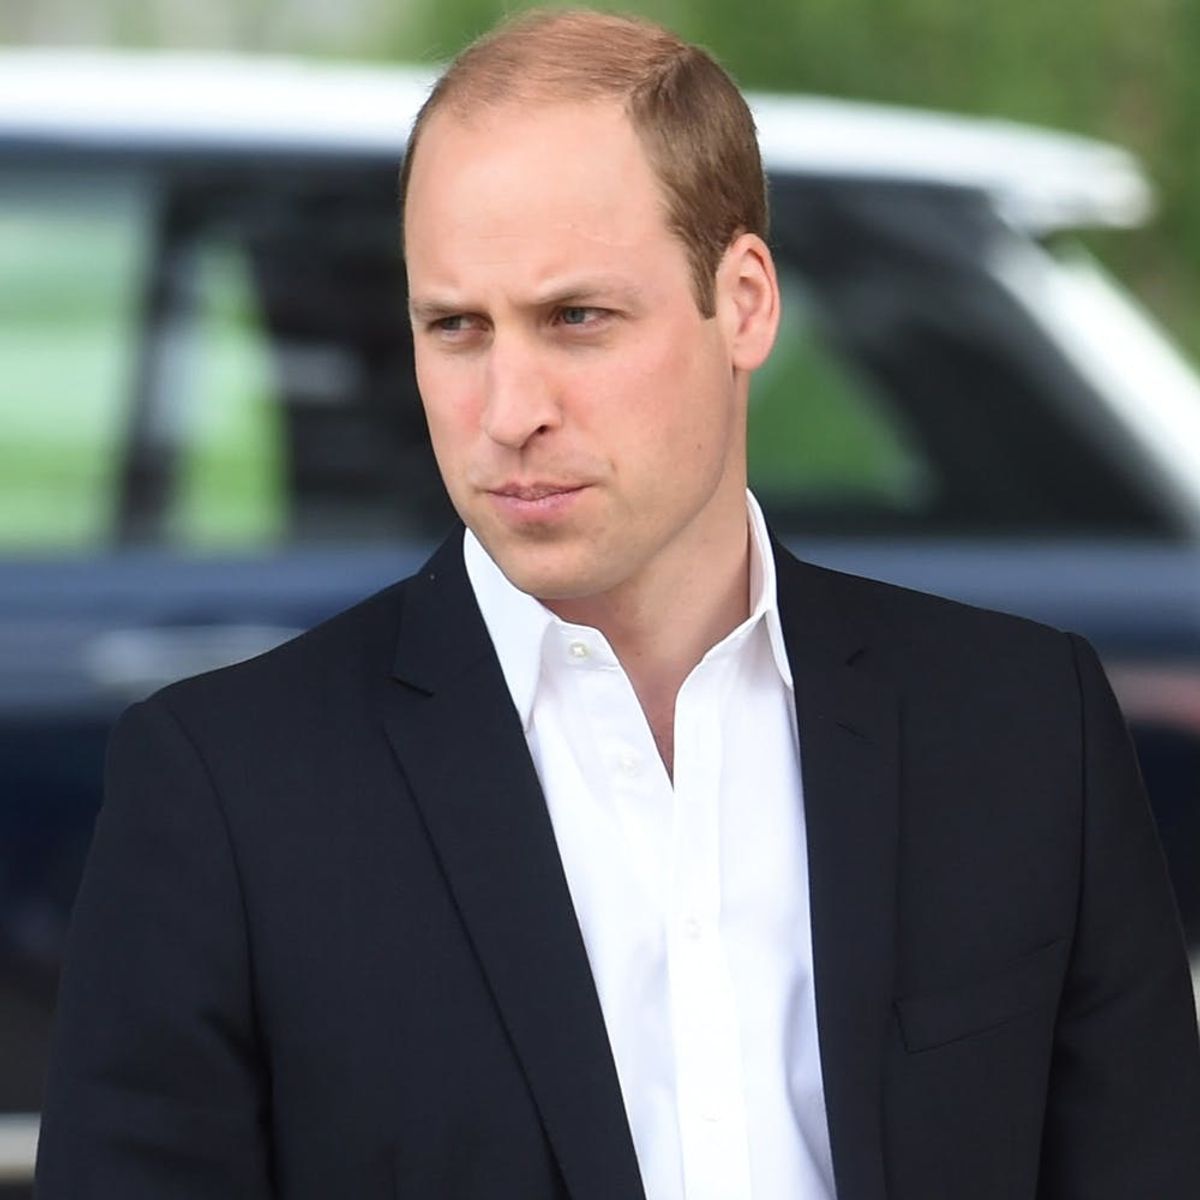 This GIF of the Queen Getting Prince William in Trouble Is Your Giggle of the Day